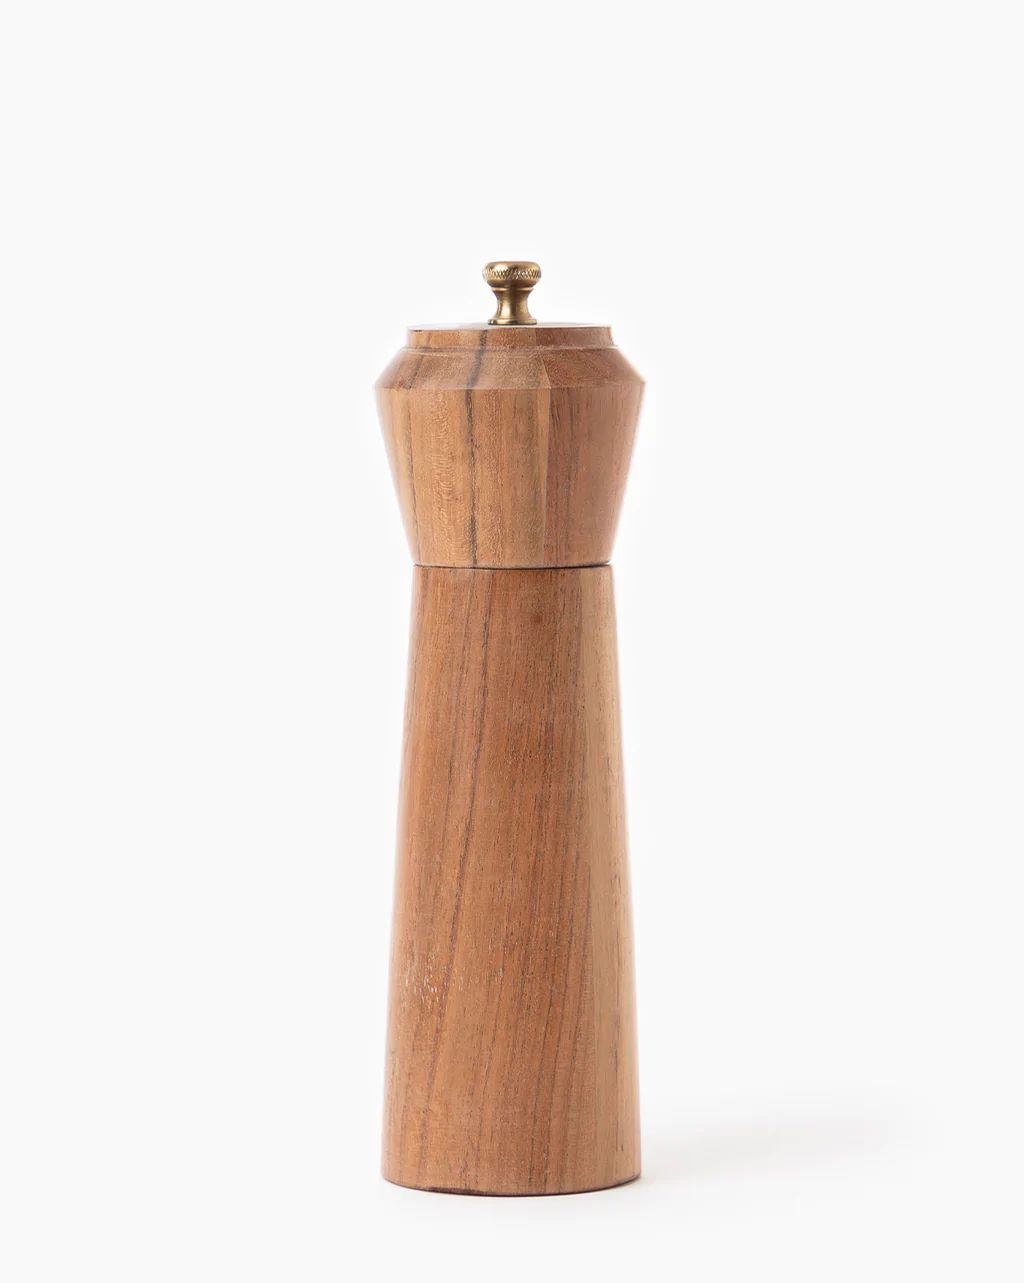 Wooden Pepper Mill | McGee & Co.